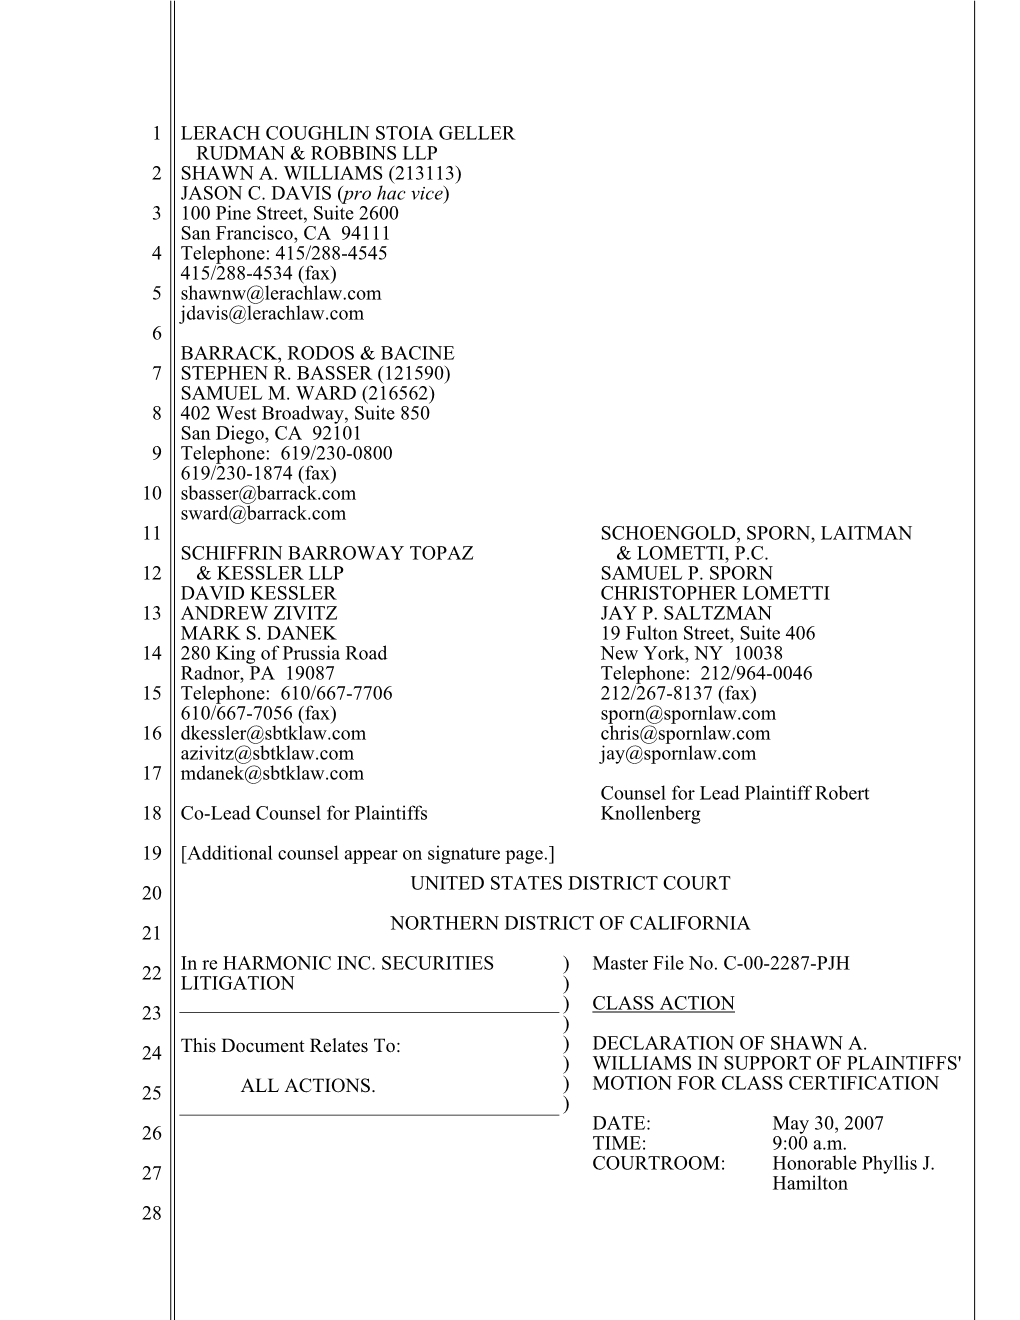 In Re Harmonic, Inc. Securities Litigation 00-CV-2287-Declaration of Shawn A. Williams in Support of Plaintiffs' Motion